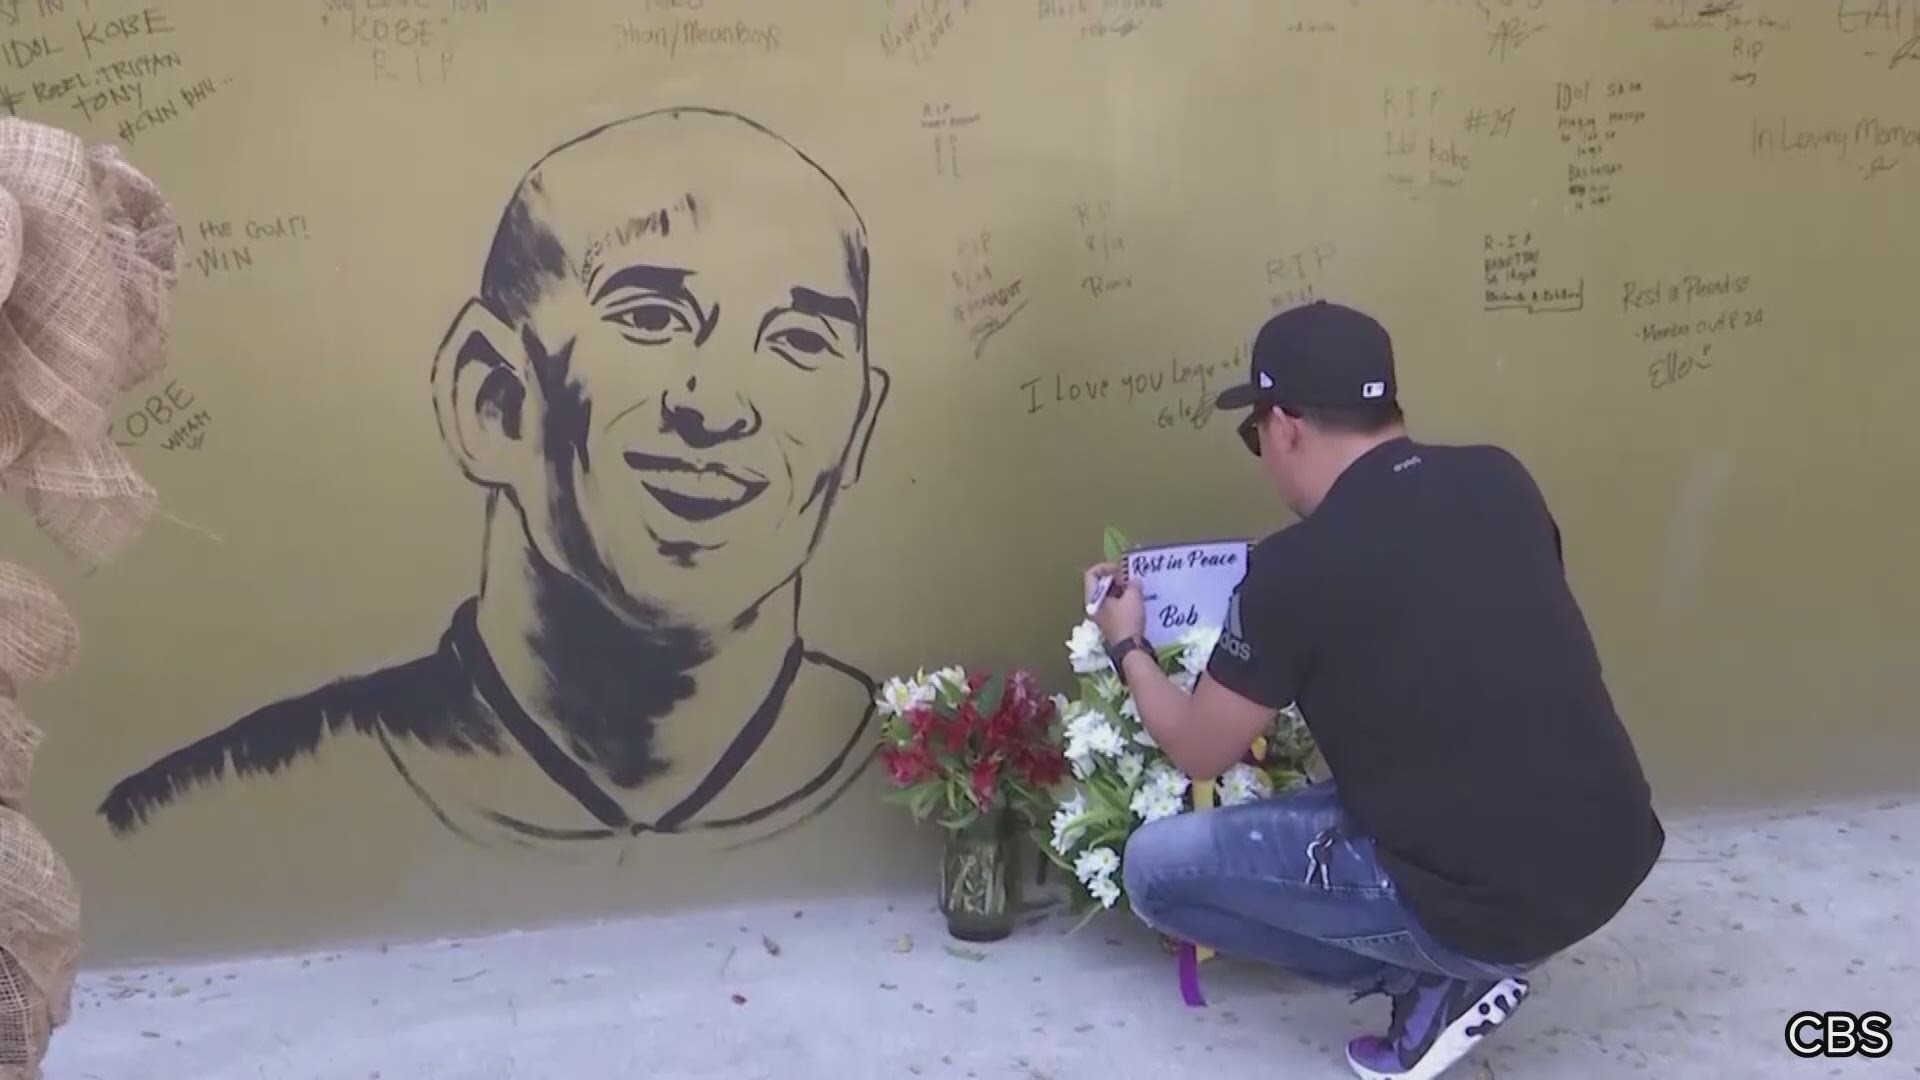 Fans in the Philippines offered flowers, wrote notes and lit candles outside a new "House of Kobe" basketball court in Manila to pay tribute to Kobe Bryant.